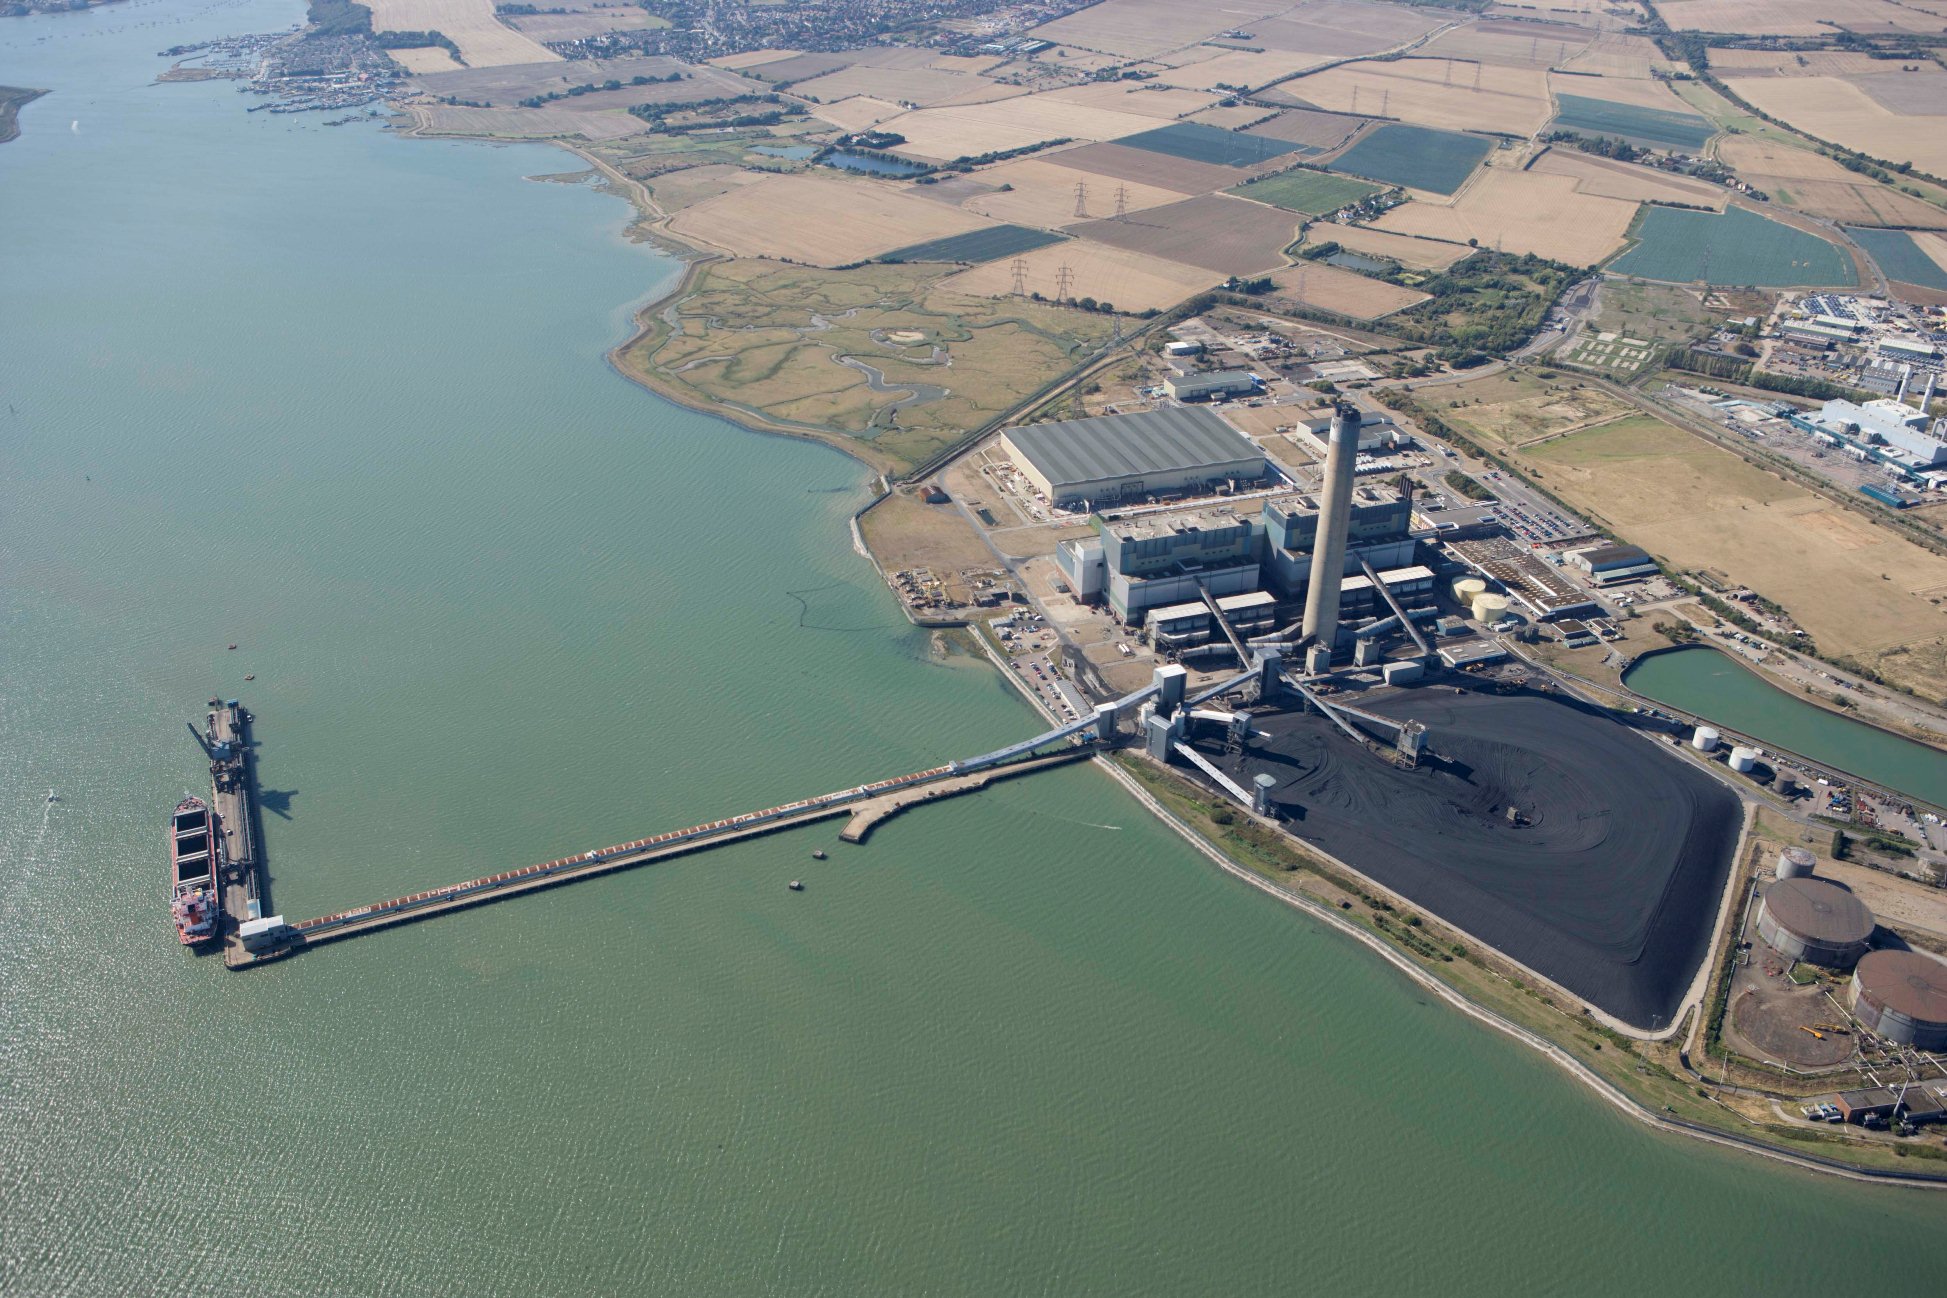 An aerial view of a power station